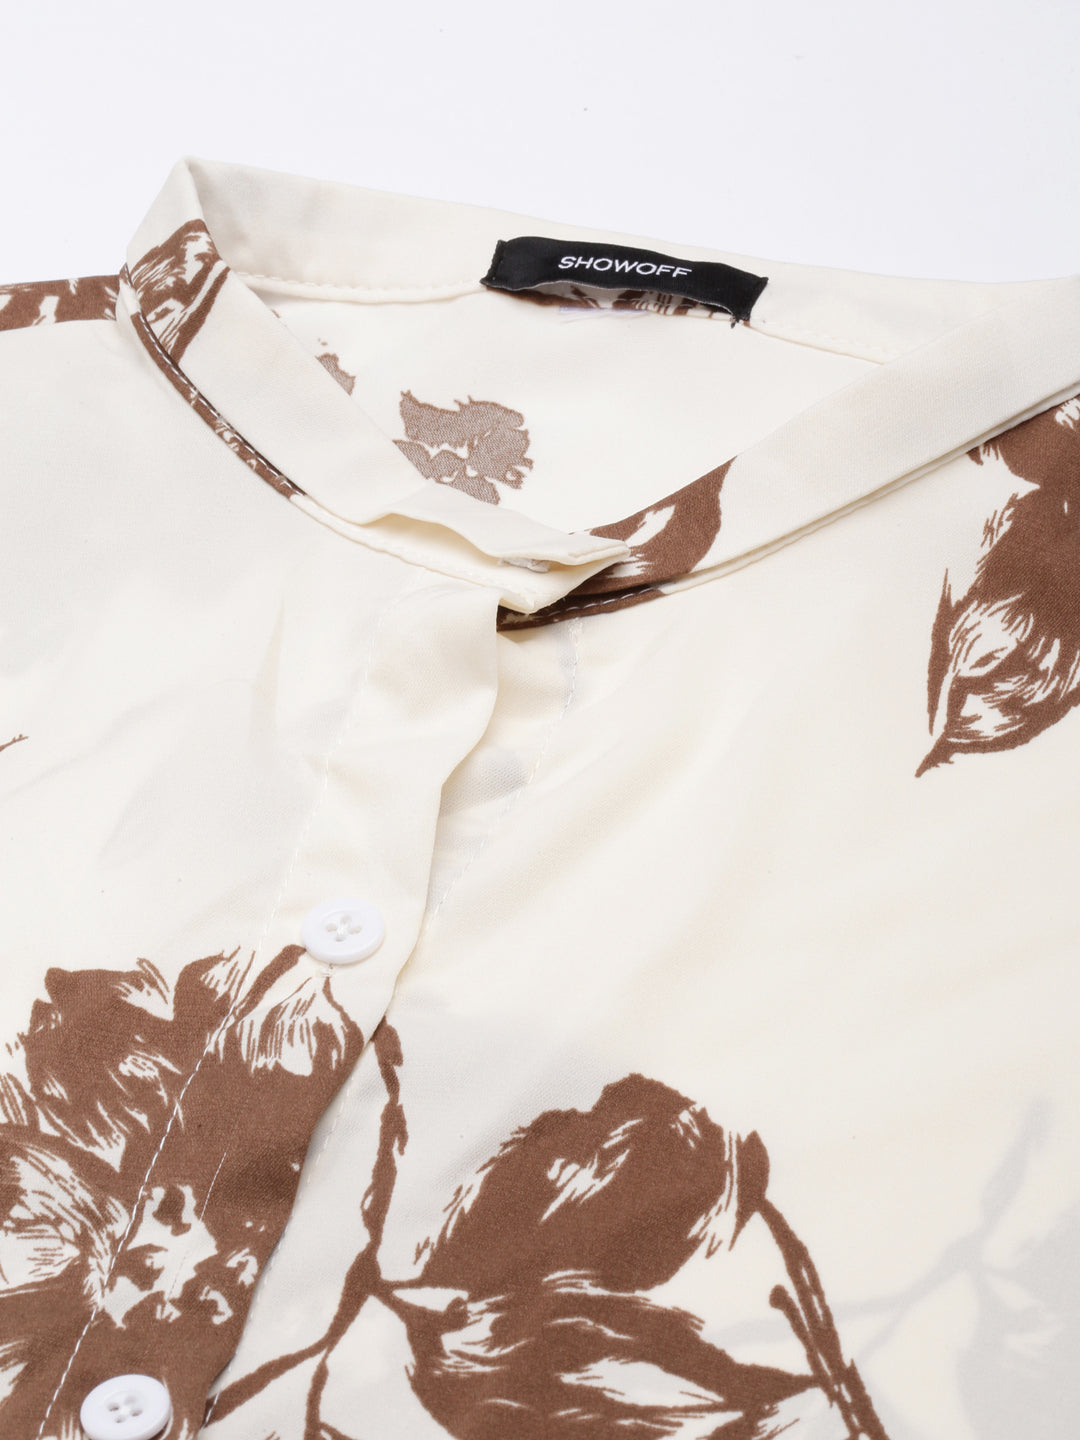 Women Floral Shirt Style Brown Over Sized Top